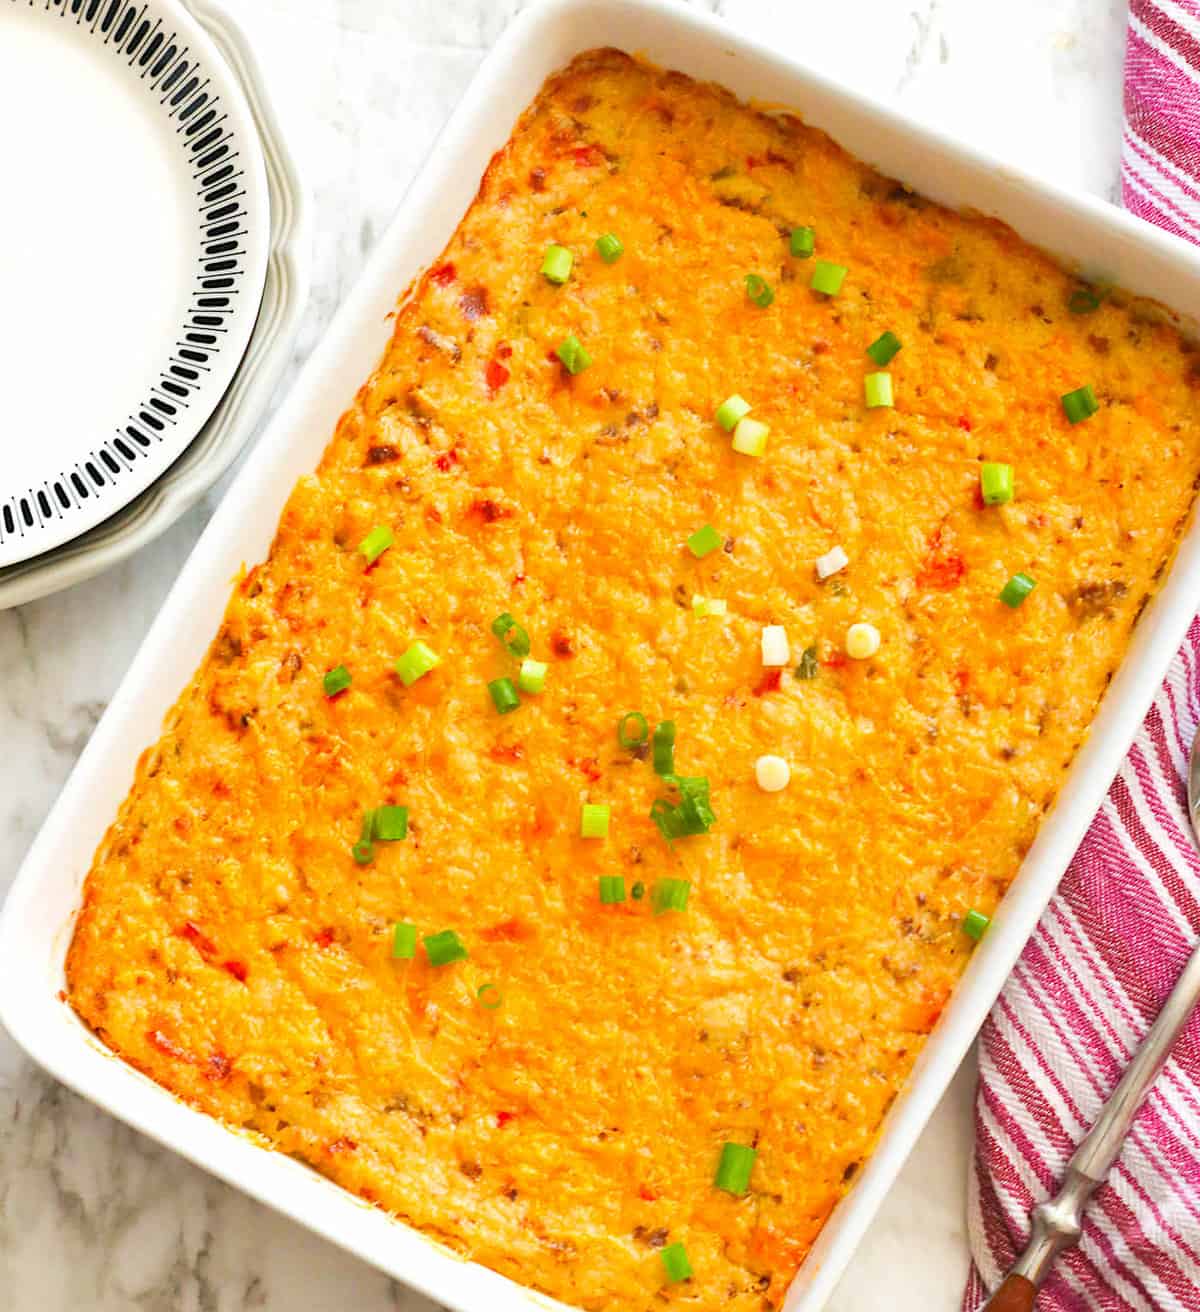 Freshly baked grits casserole topped with green onions